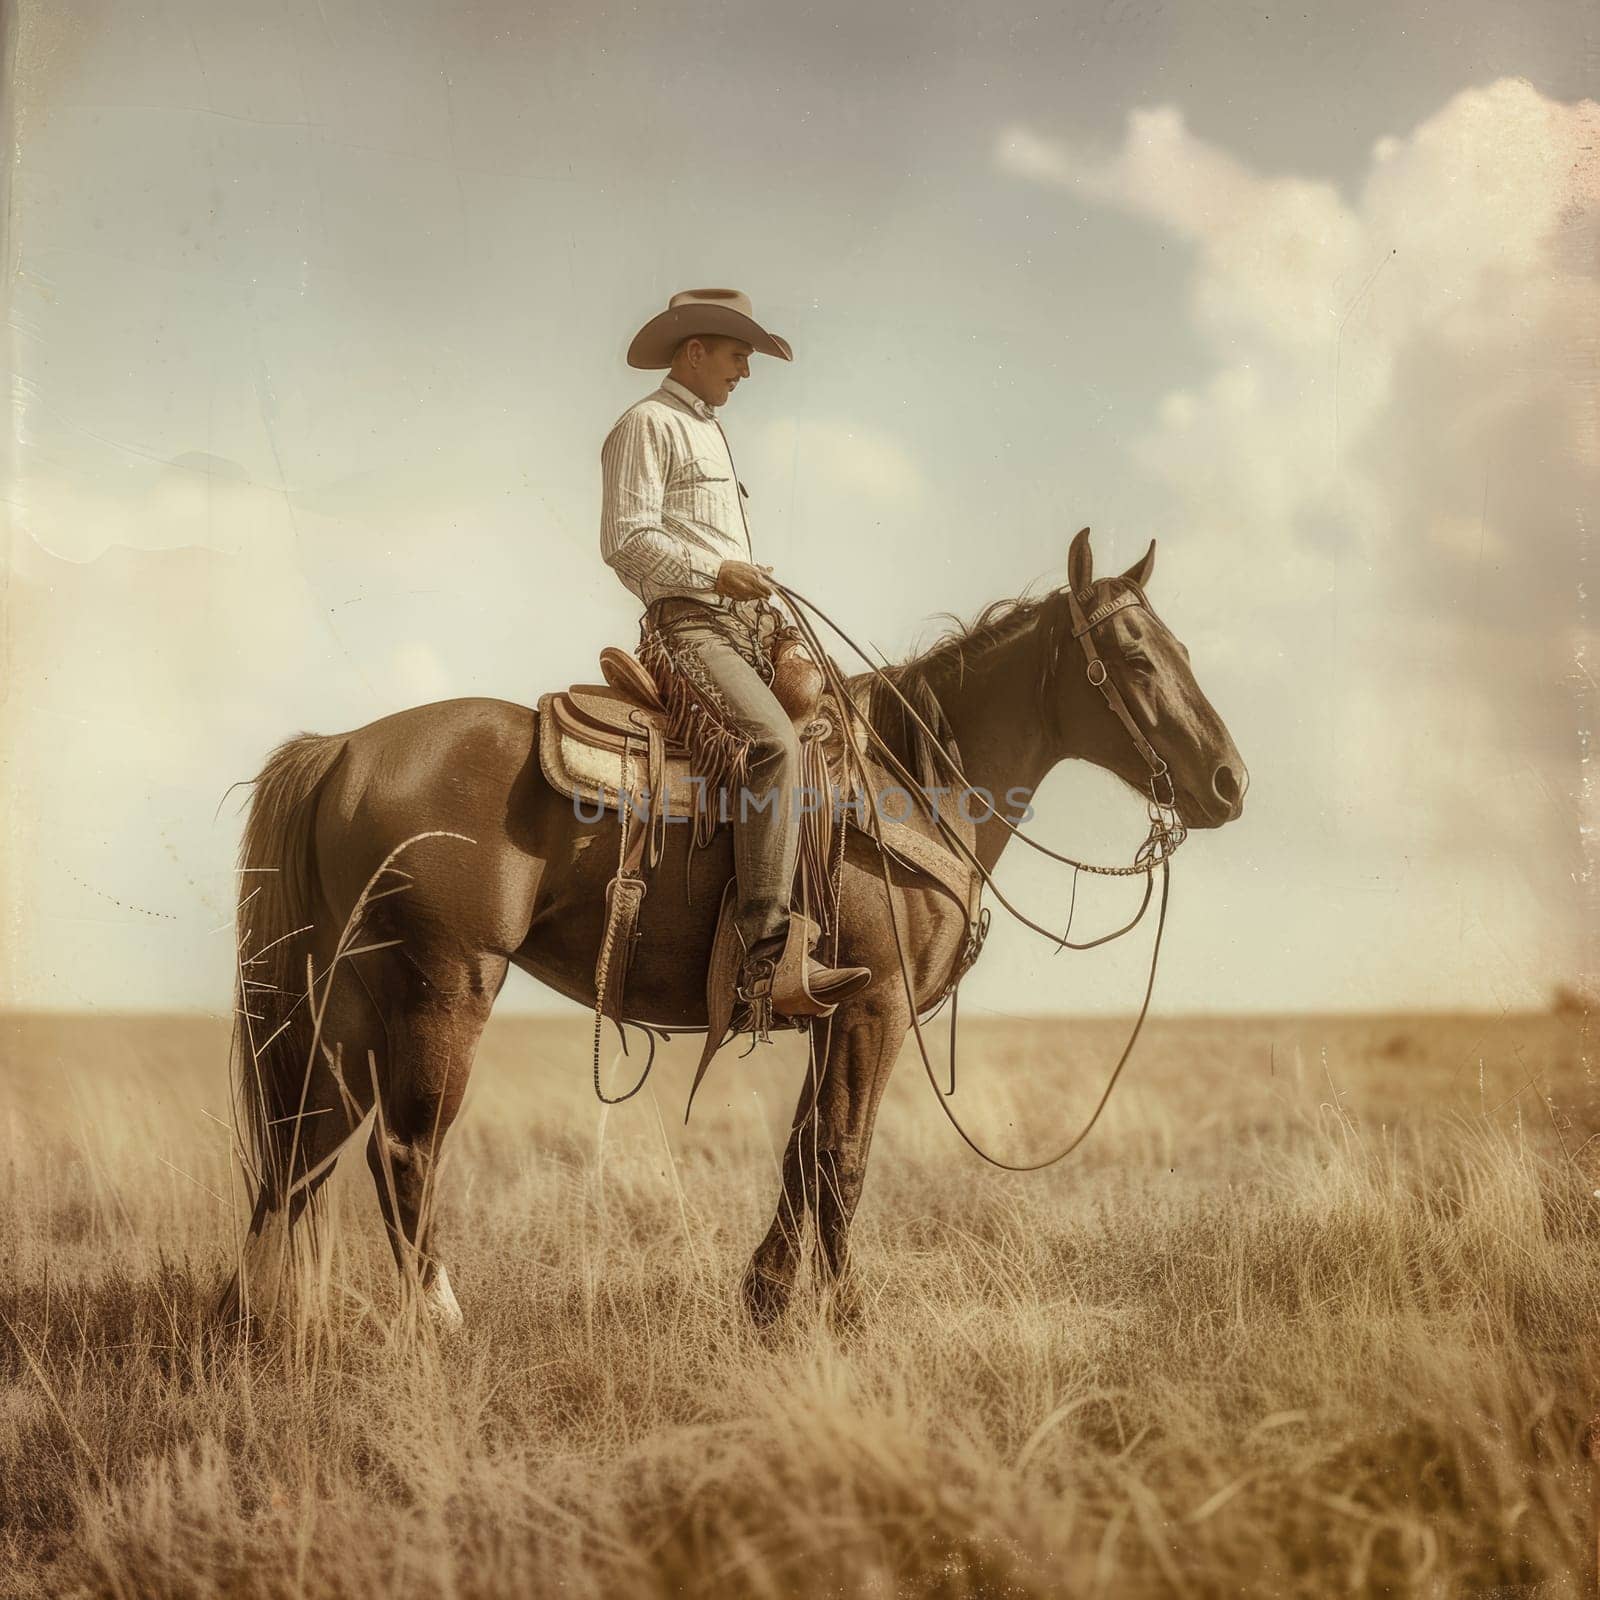 Vintage sepia-toned image of a cowboy riding a horse in an open field. by sfinks